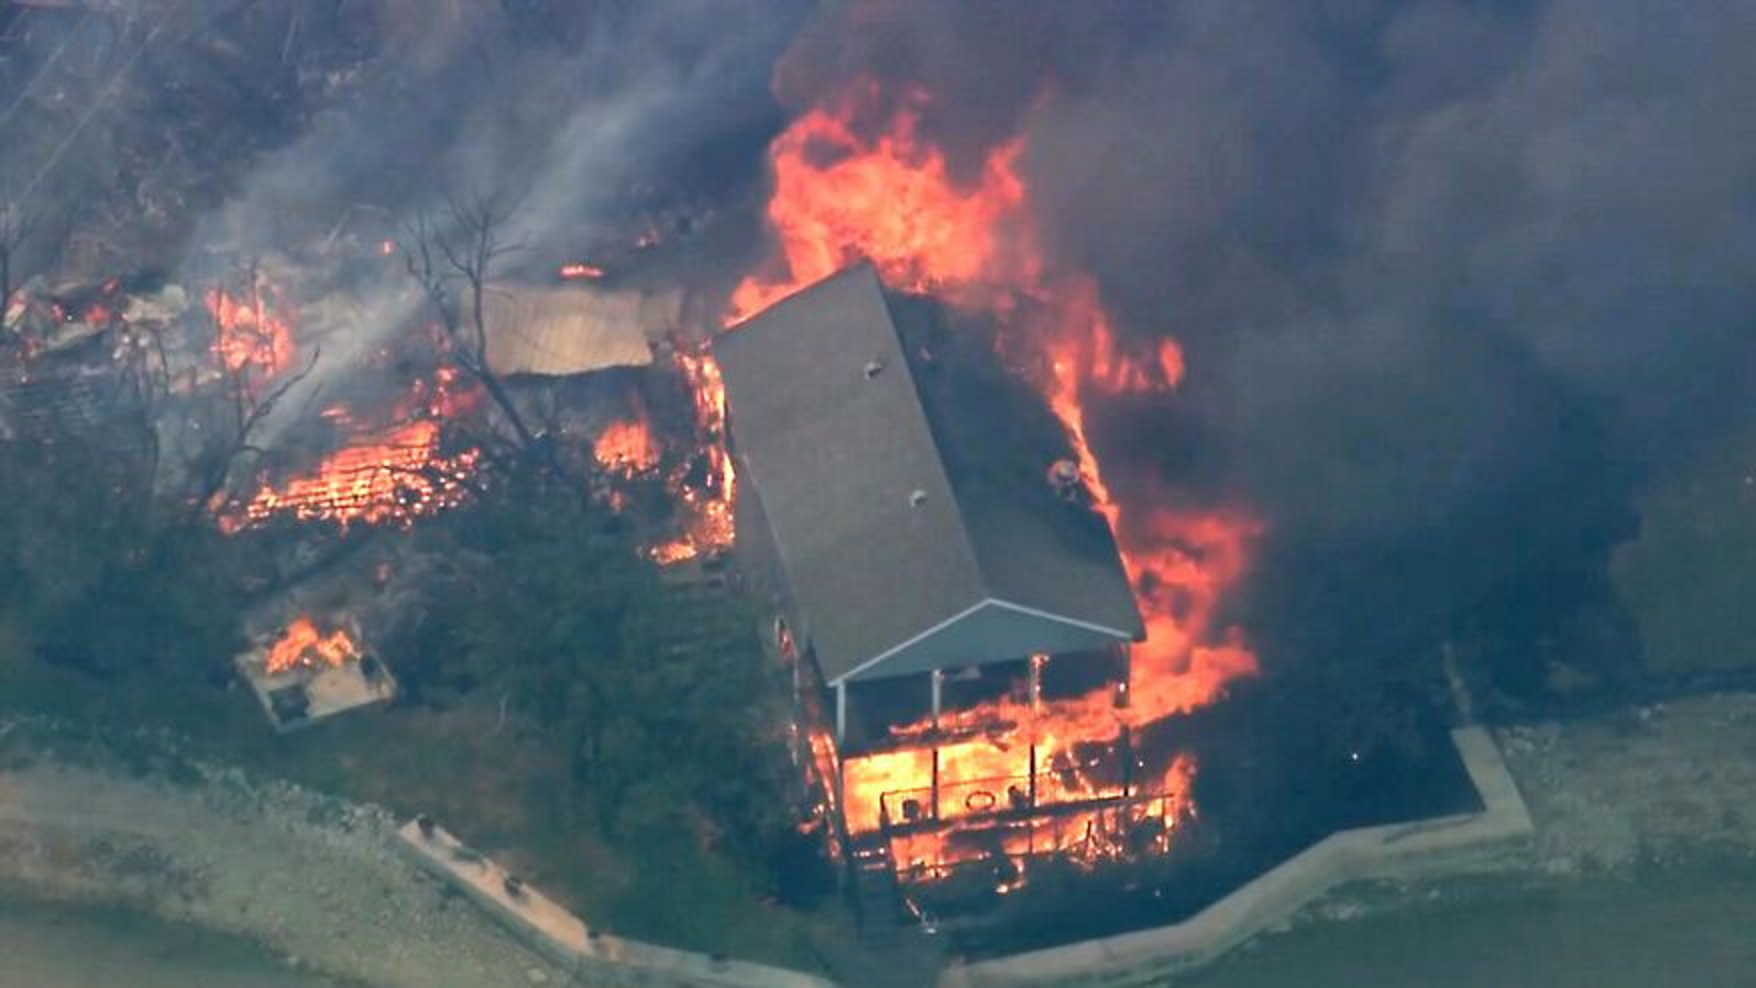 Aerial view of a structure burning during a wildfire in Palo Pinto County, Texas on Monday, 18 July 2022. The 110-degree heat wave caused a record 24 wildfires in Texas this week. Two Texas wildfires consumed at least 21 homes amid the record heat wave. Photo: KDFW FOX 4 / AP